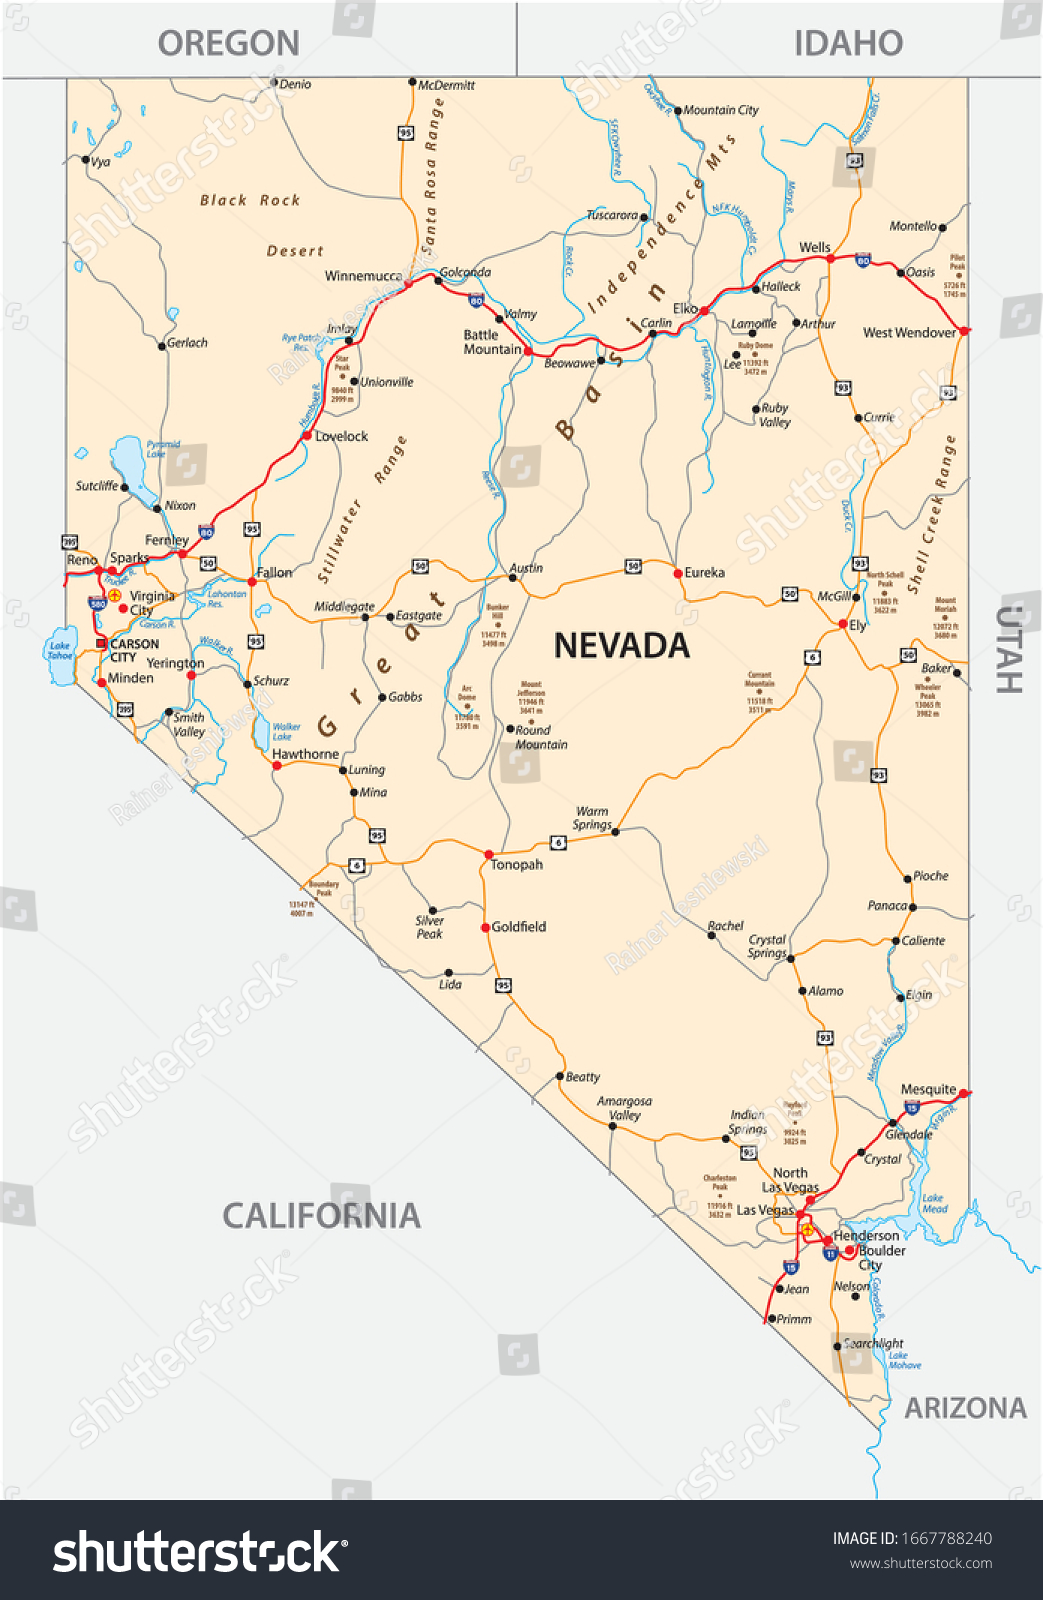 SVG of Nevada road map with interstate US highways and federal highways svg